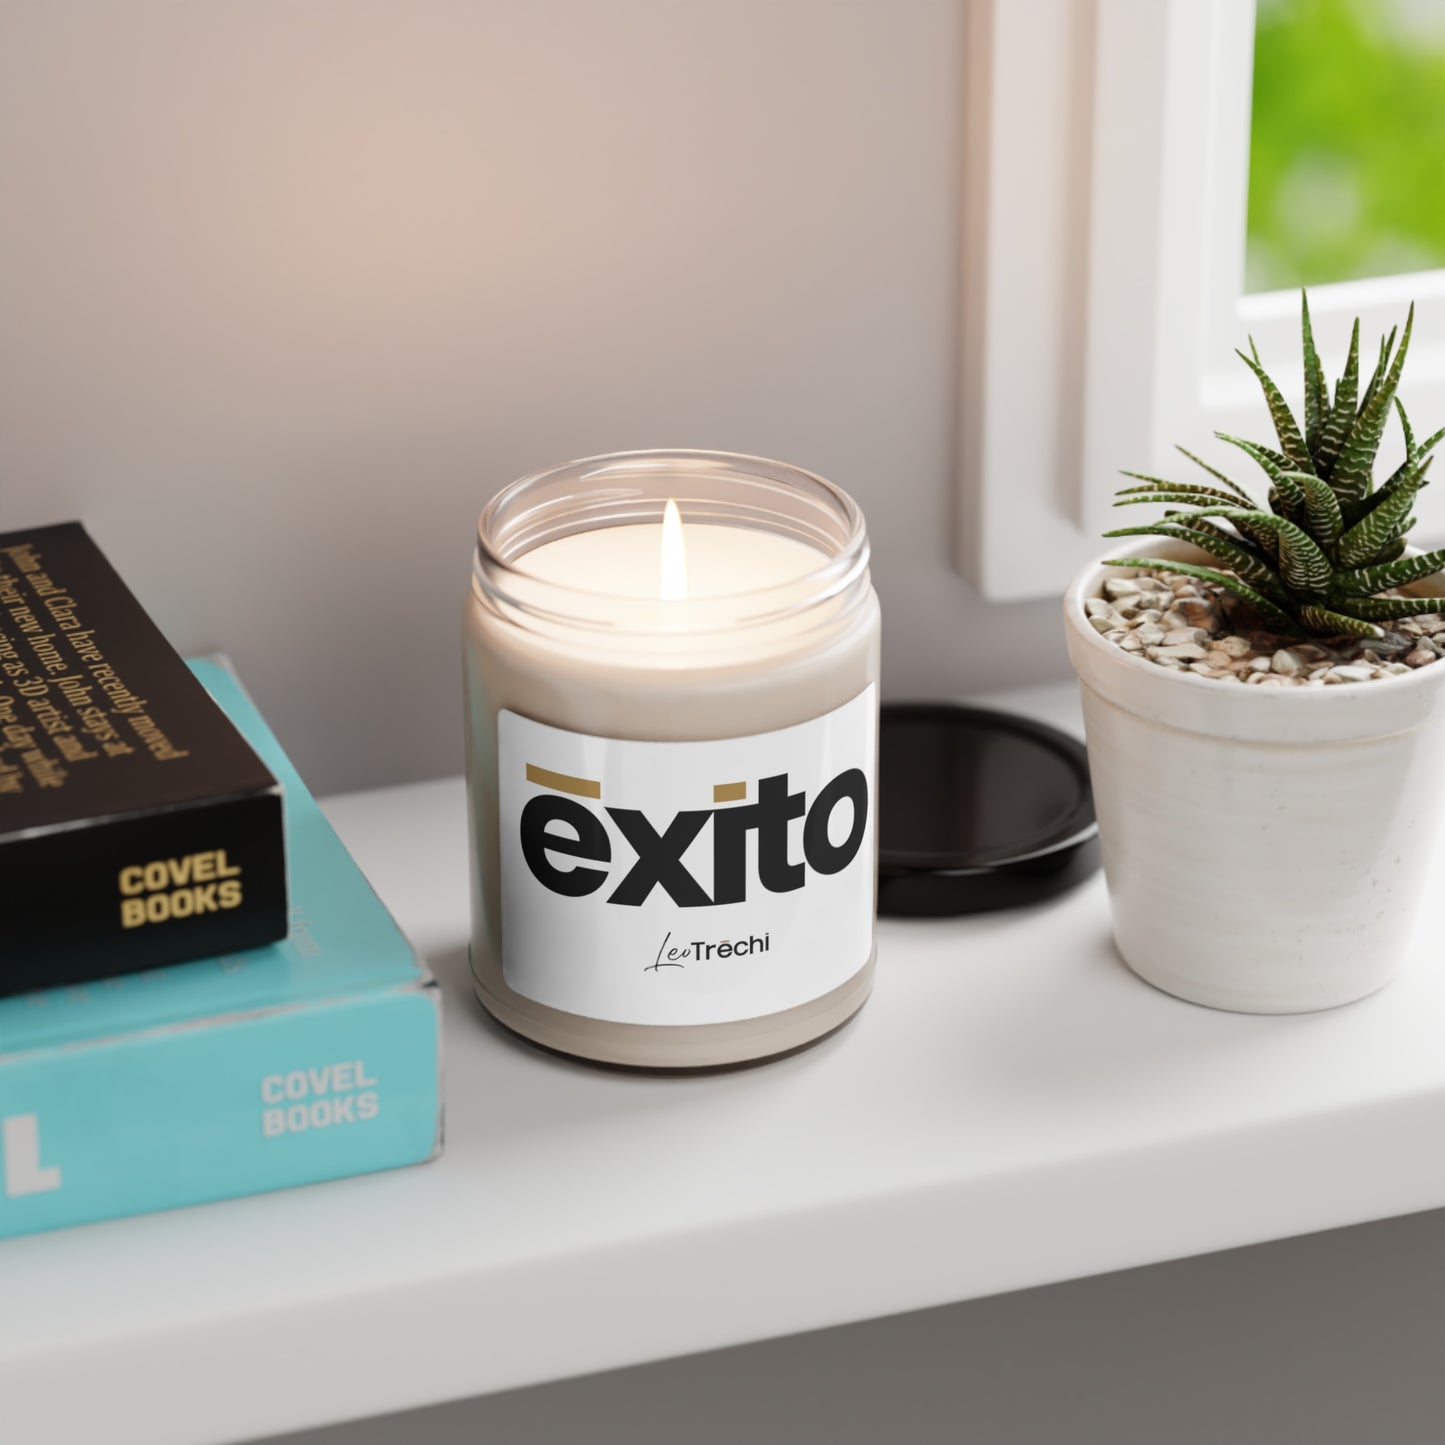 exito - Scented Soy Candle, 9oz